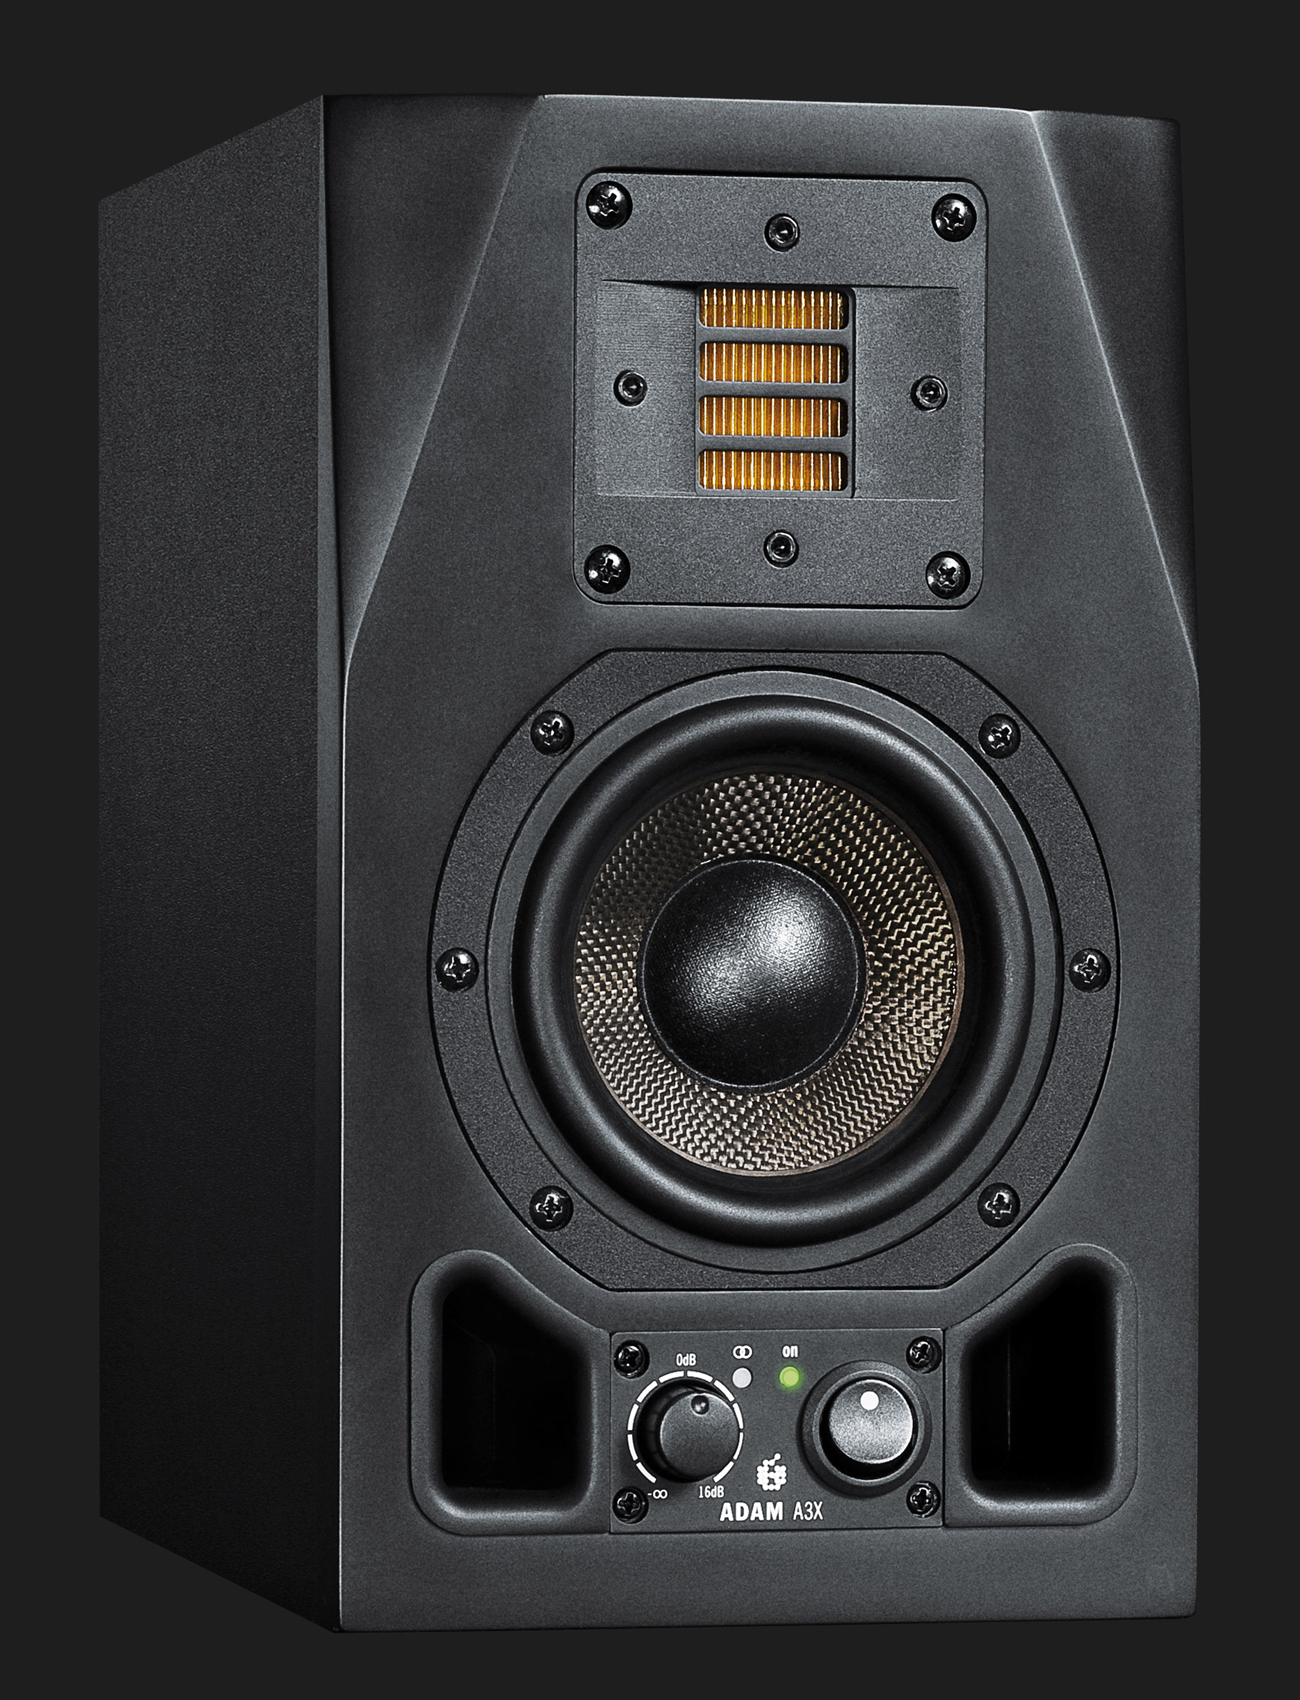 ADAM Audio - A3X Active Studio Monitor (Archived Product)